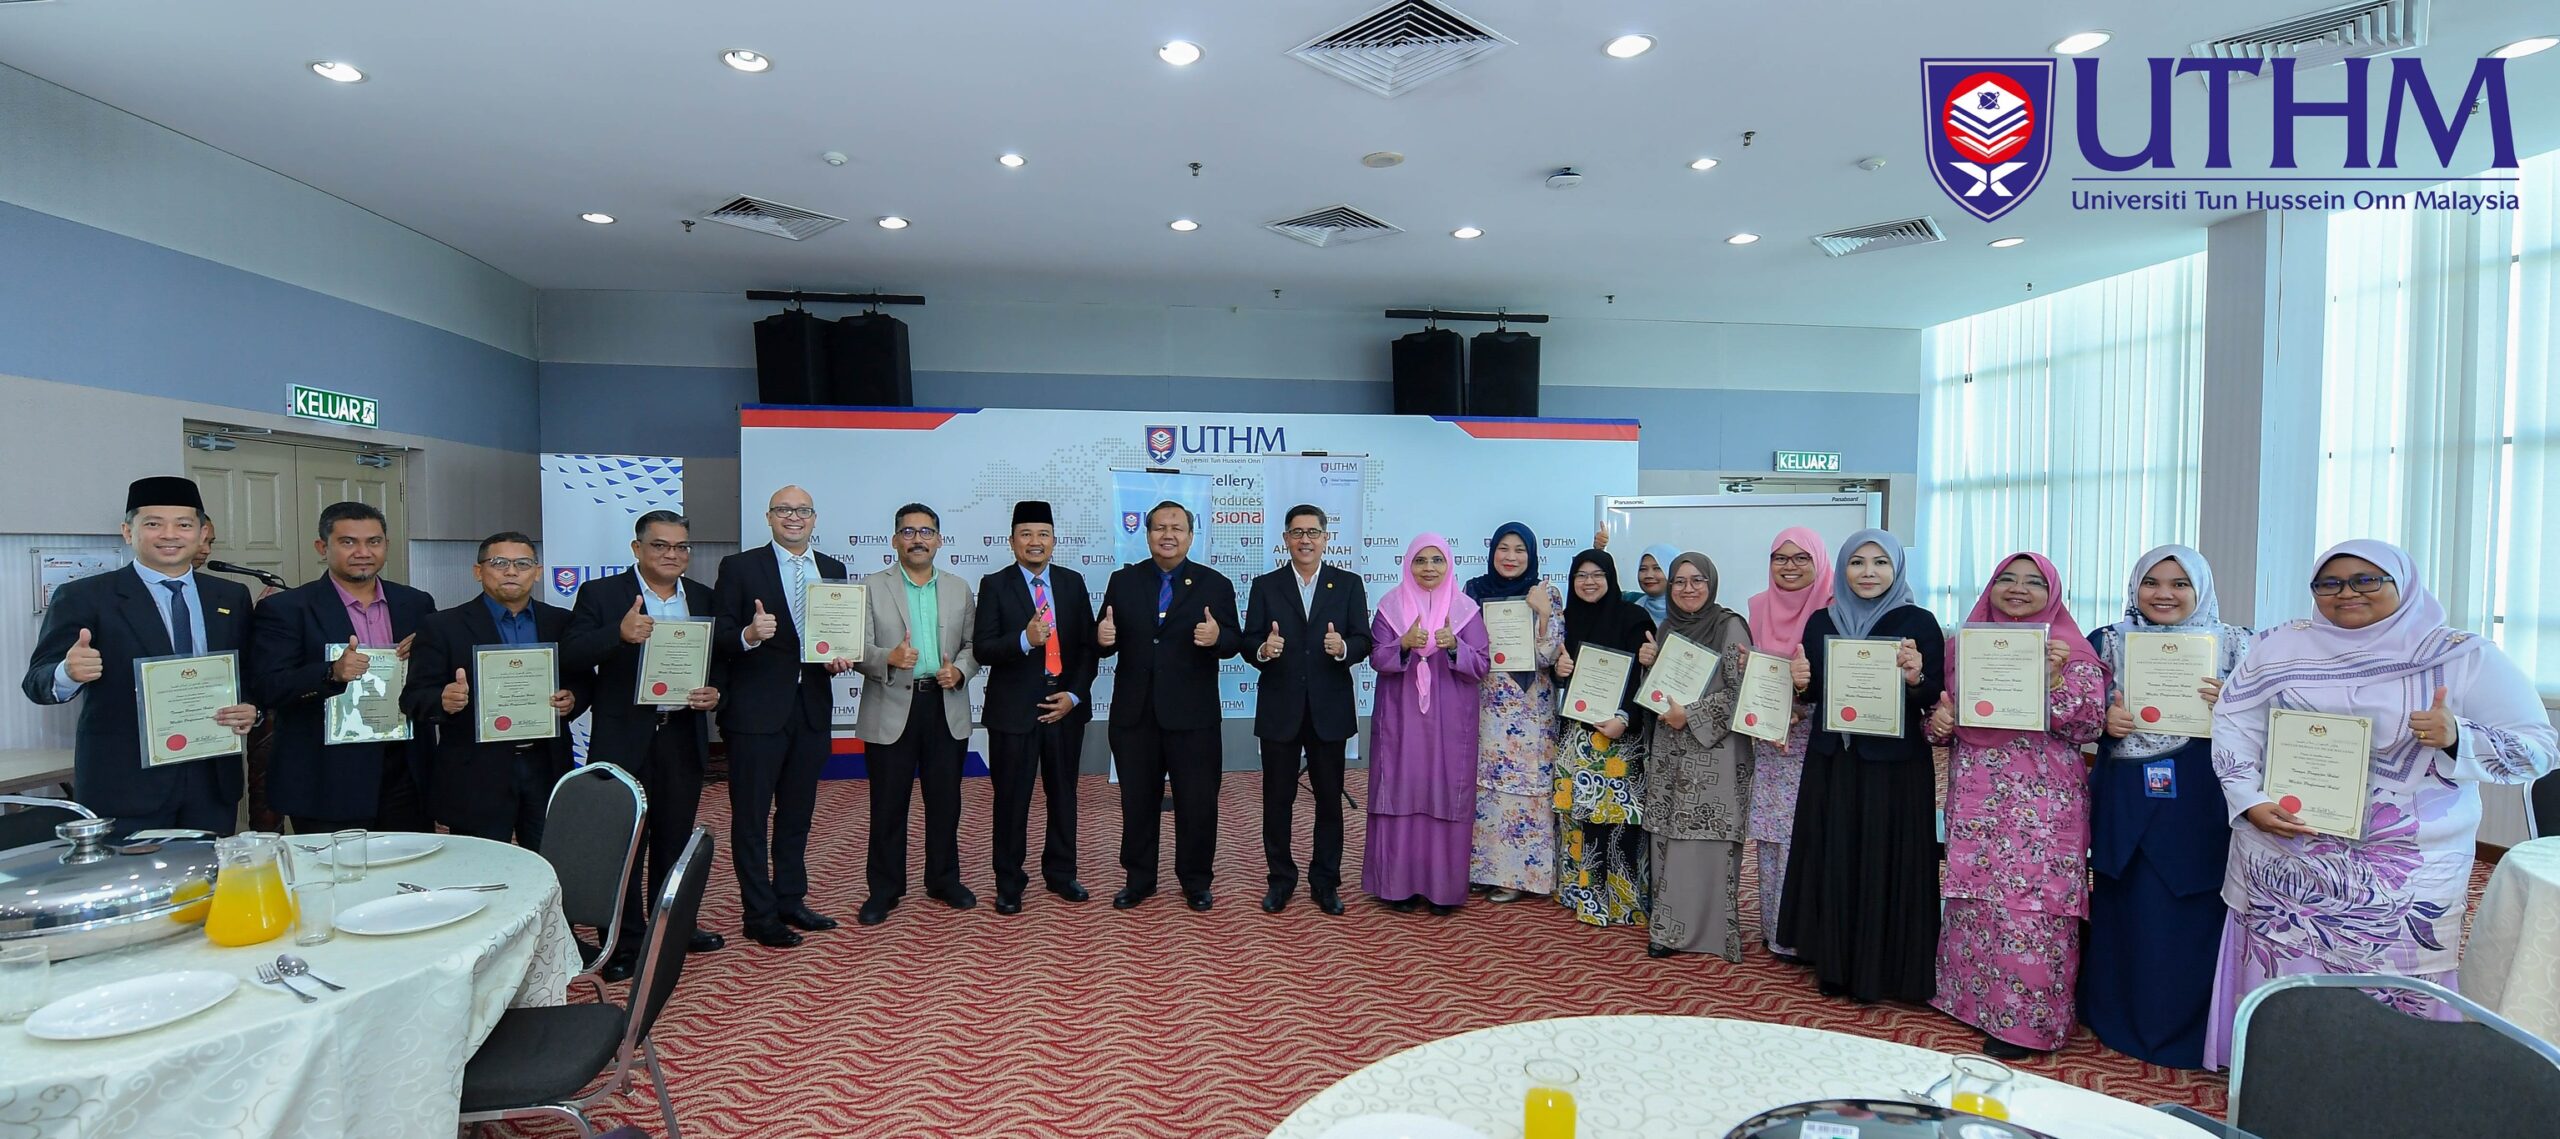 Certified Halal Instructor conferred by JAKIM